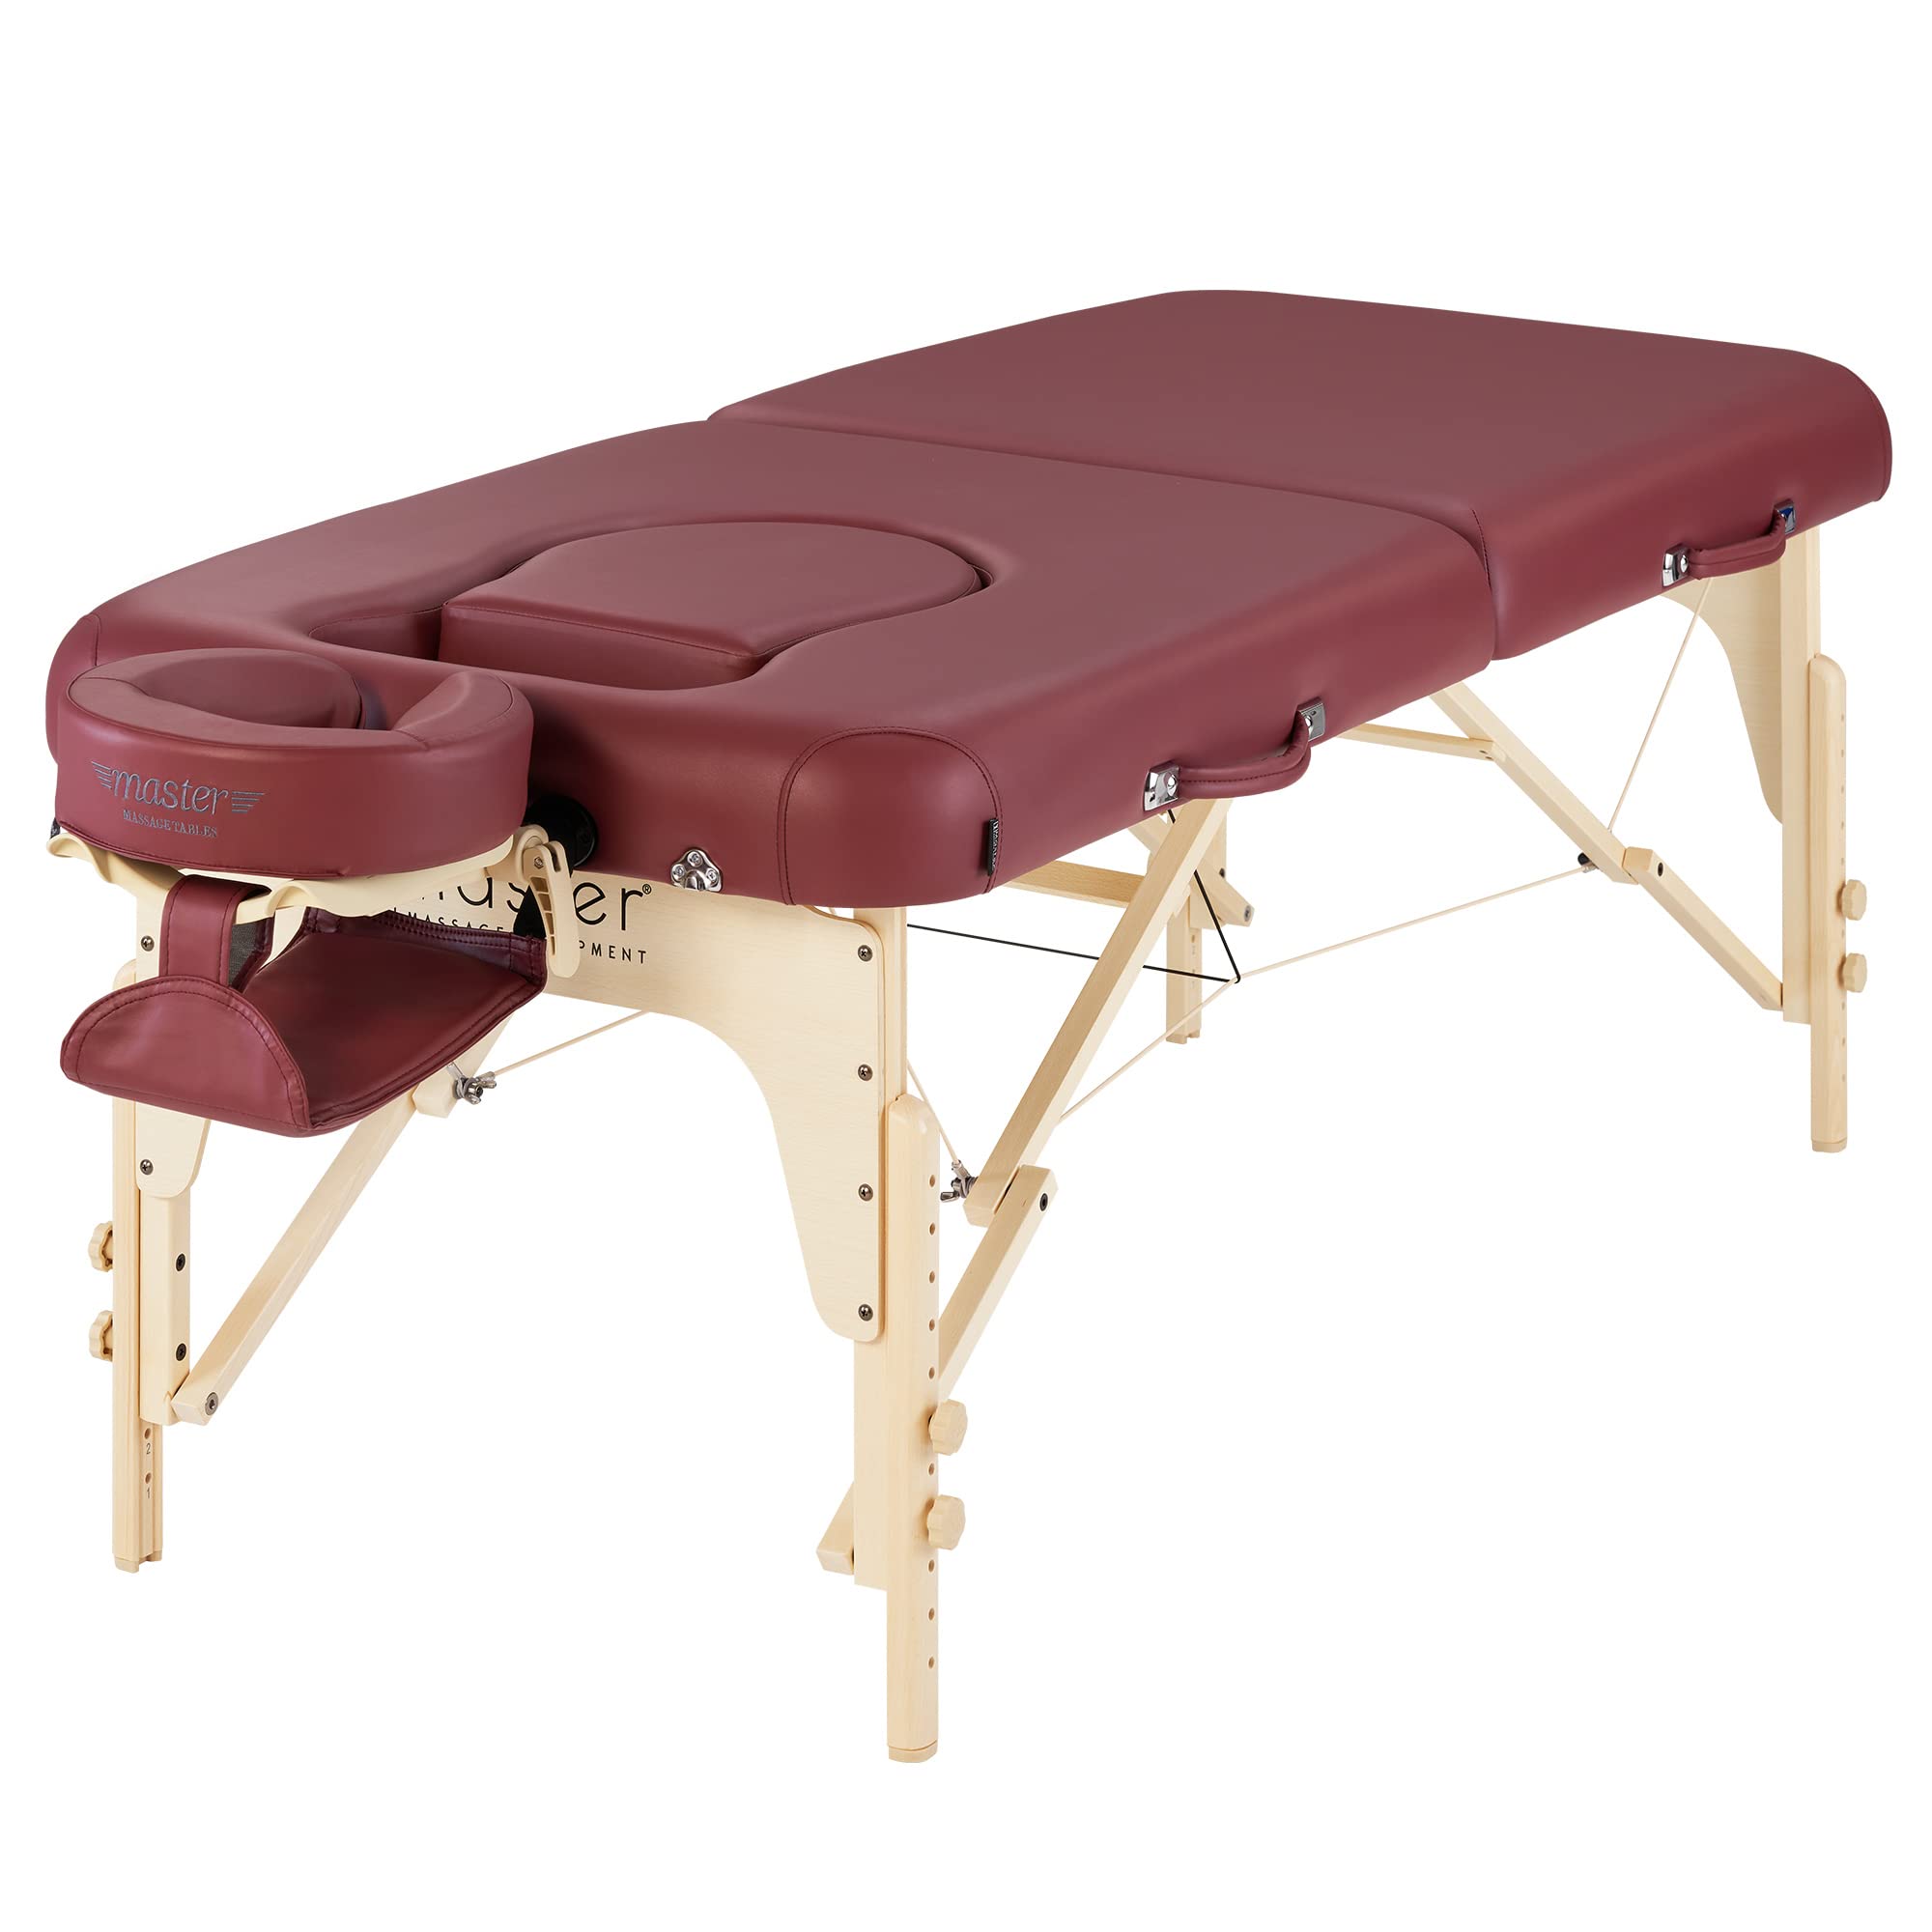 Master Massage 30 Eva Portable Pregnancy Massage Table for Female Clients and Obese Individuals Spa Salon Facial Bed for P